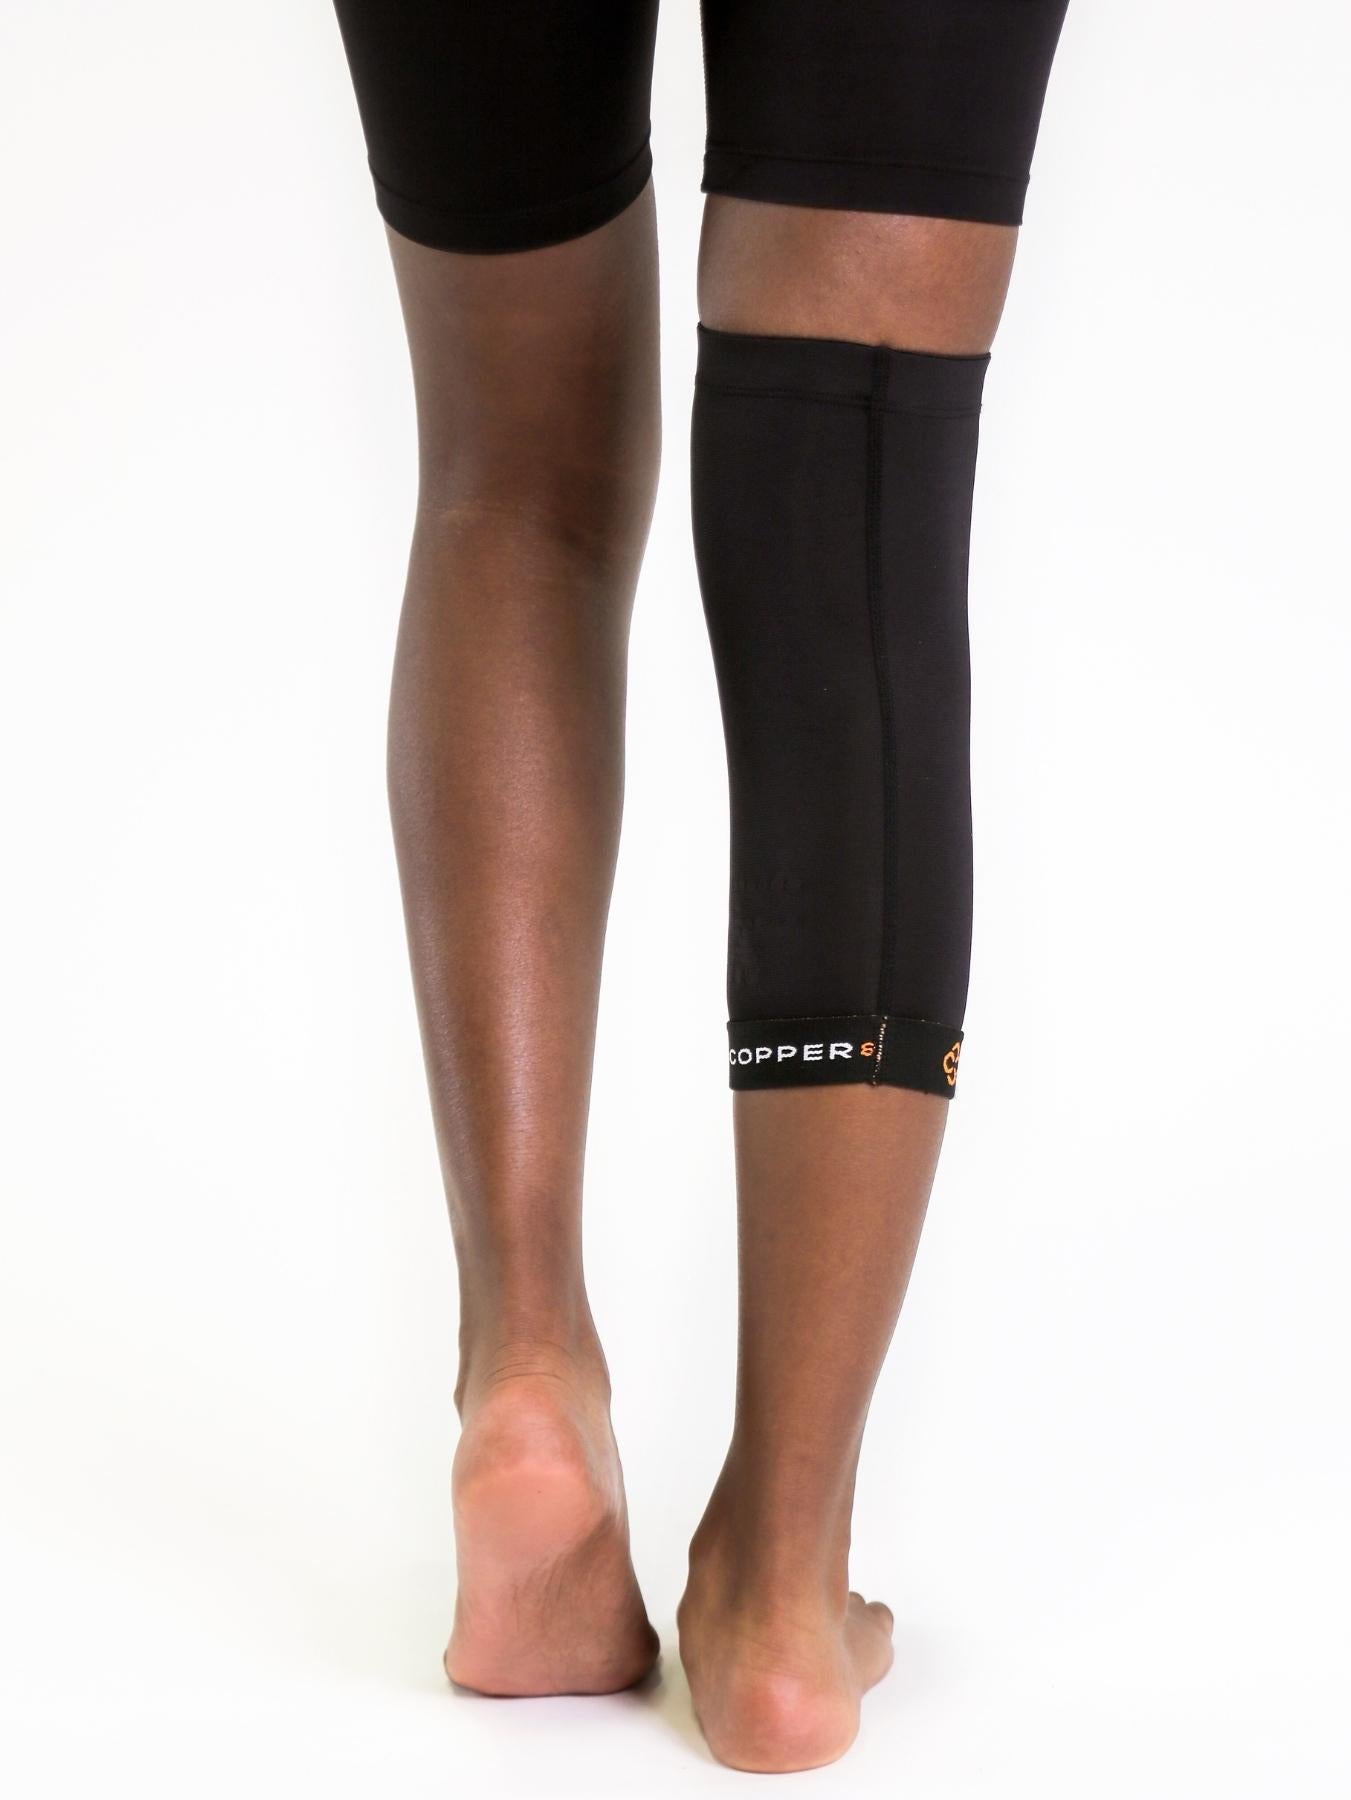 Copper Fit Freedom Compression Knee Sleeve